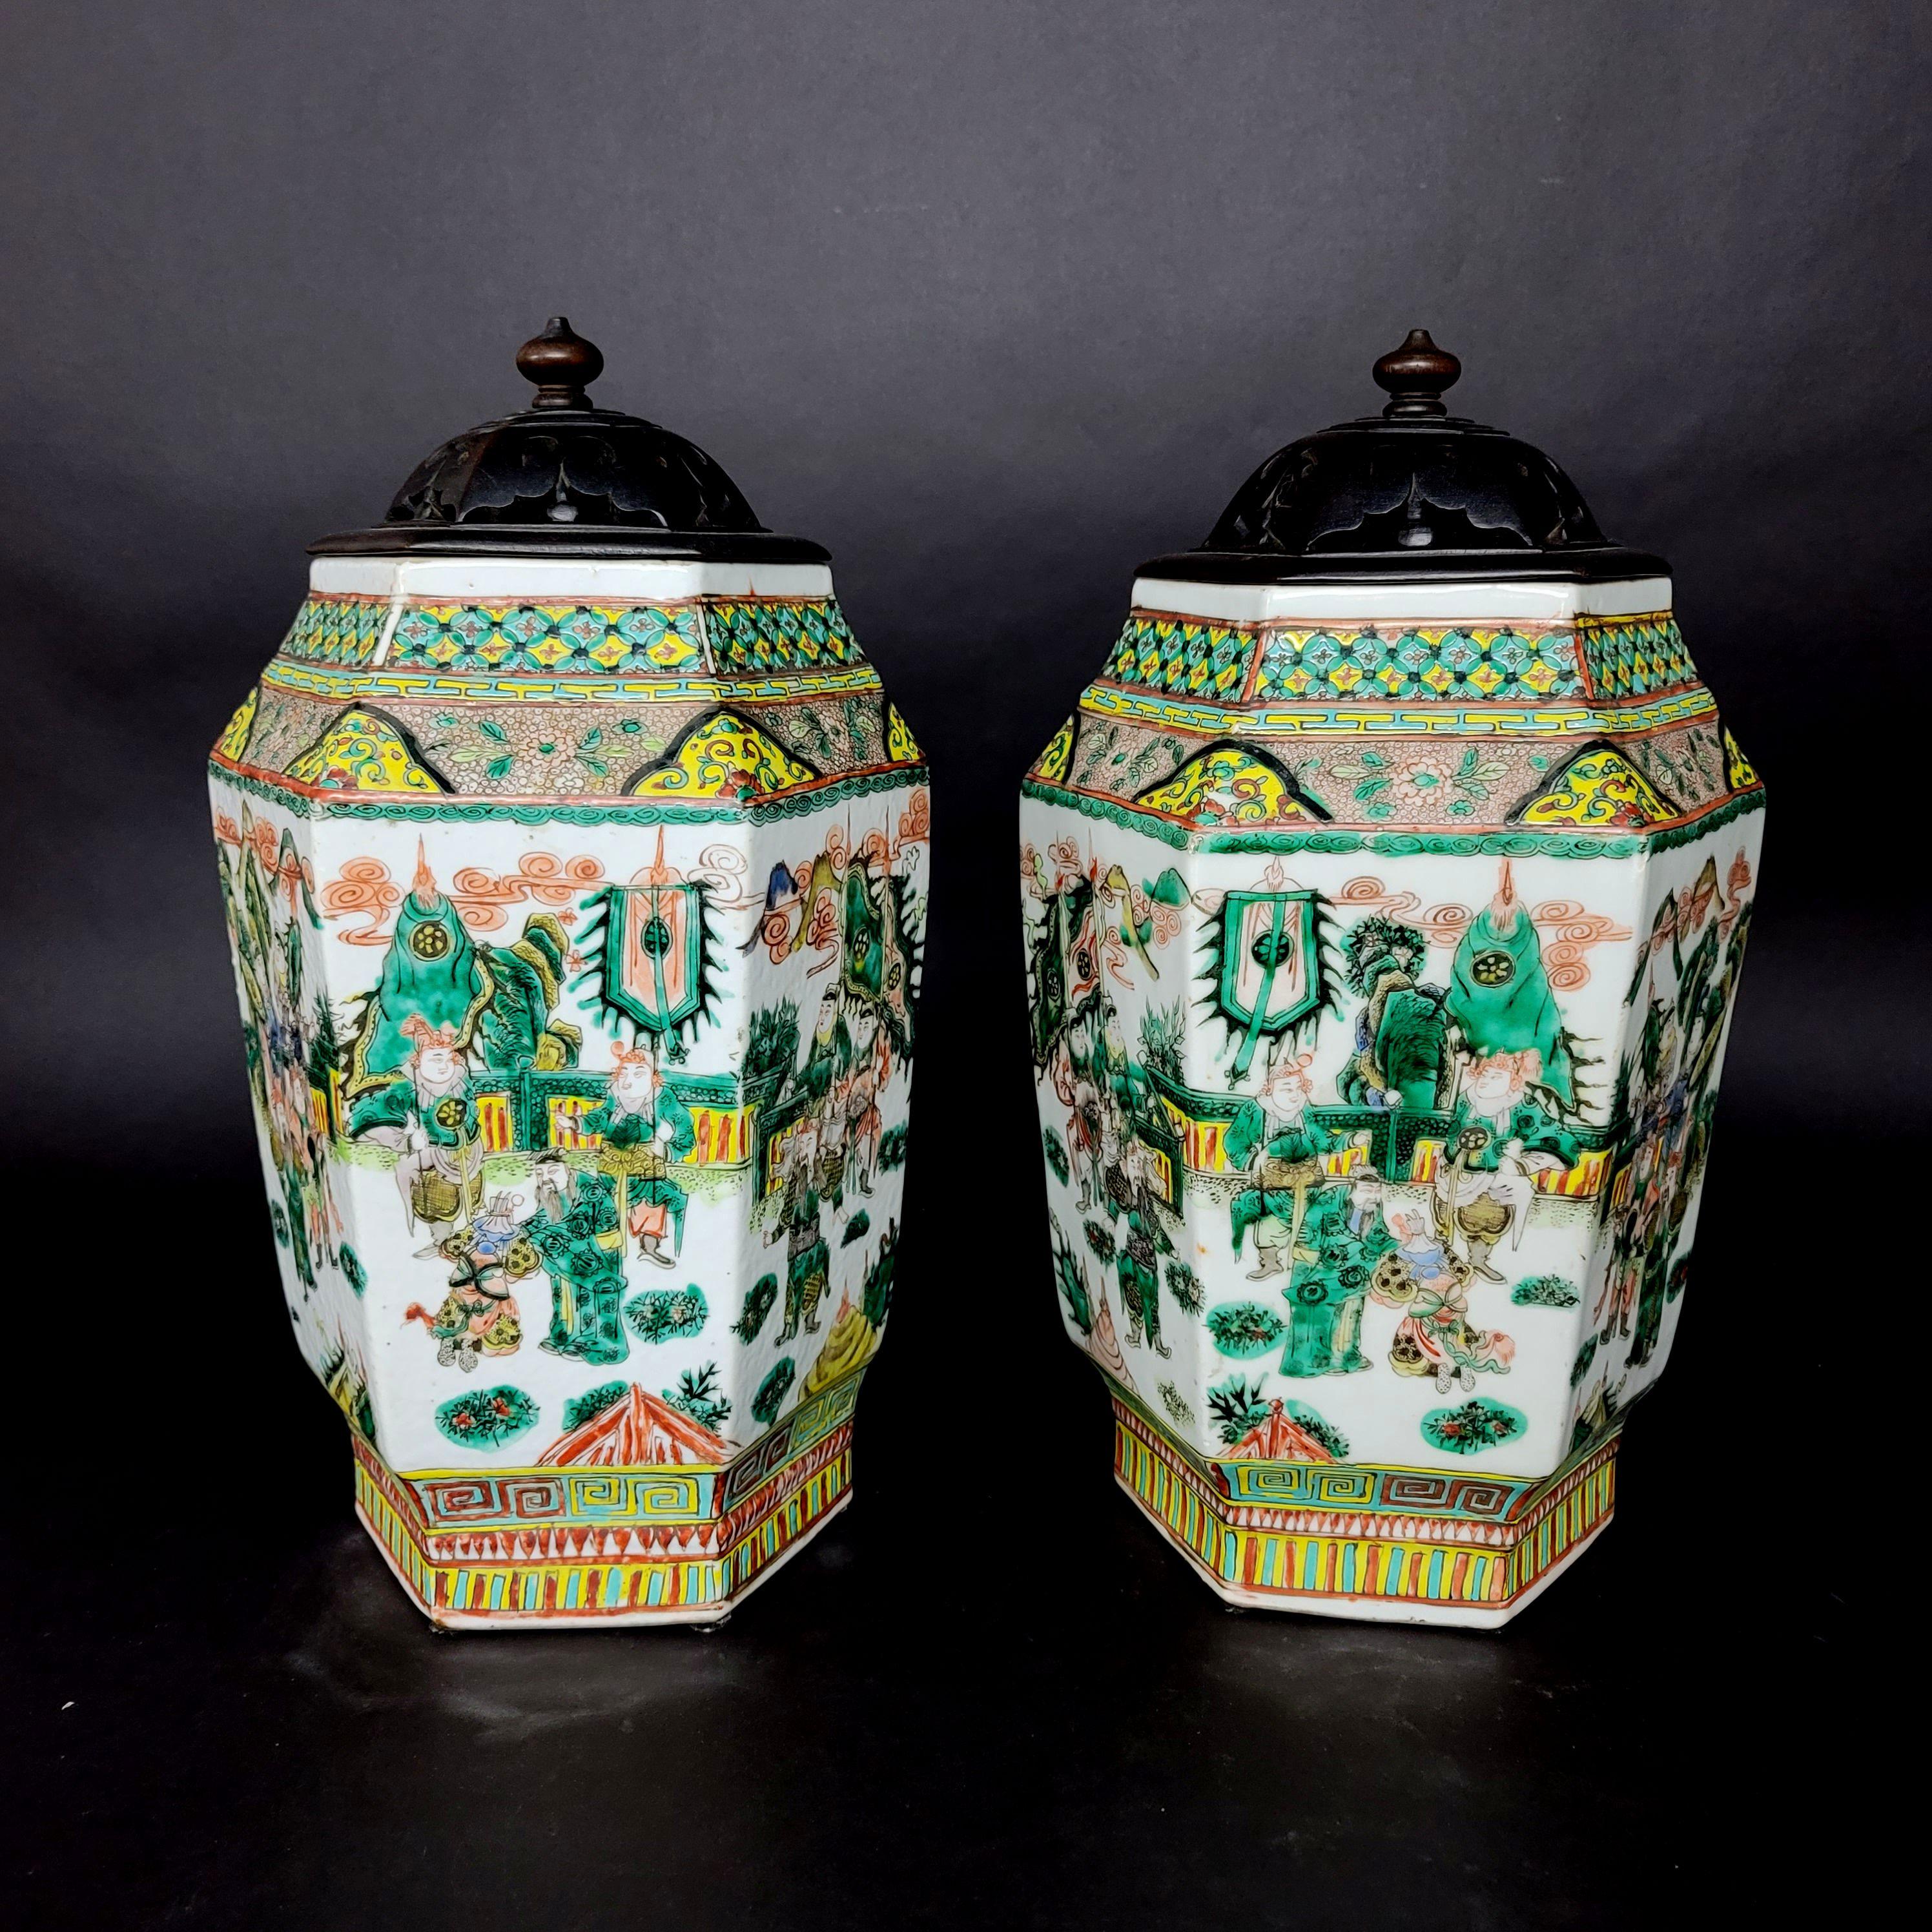 Matching Pair of Chinese Hexagonal Porcelain Vases, 19th Century In Good Condition For Sale In Norton, MA